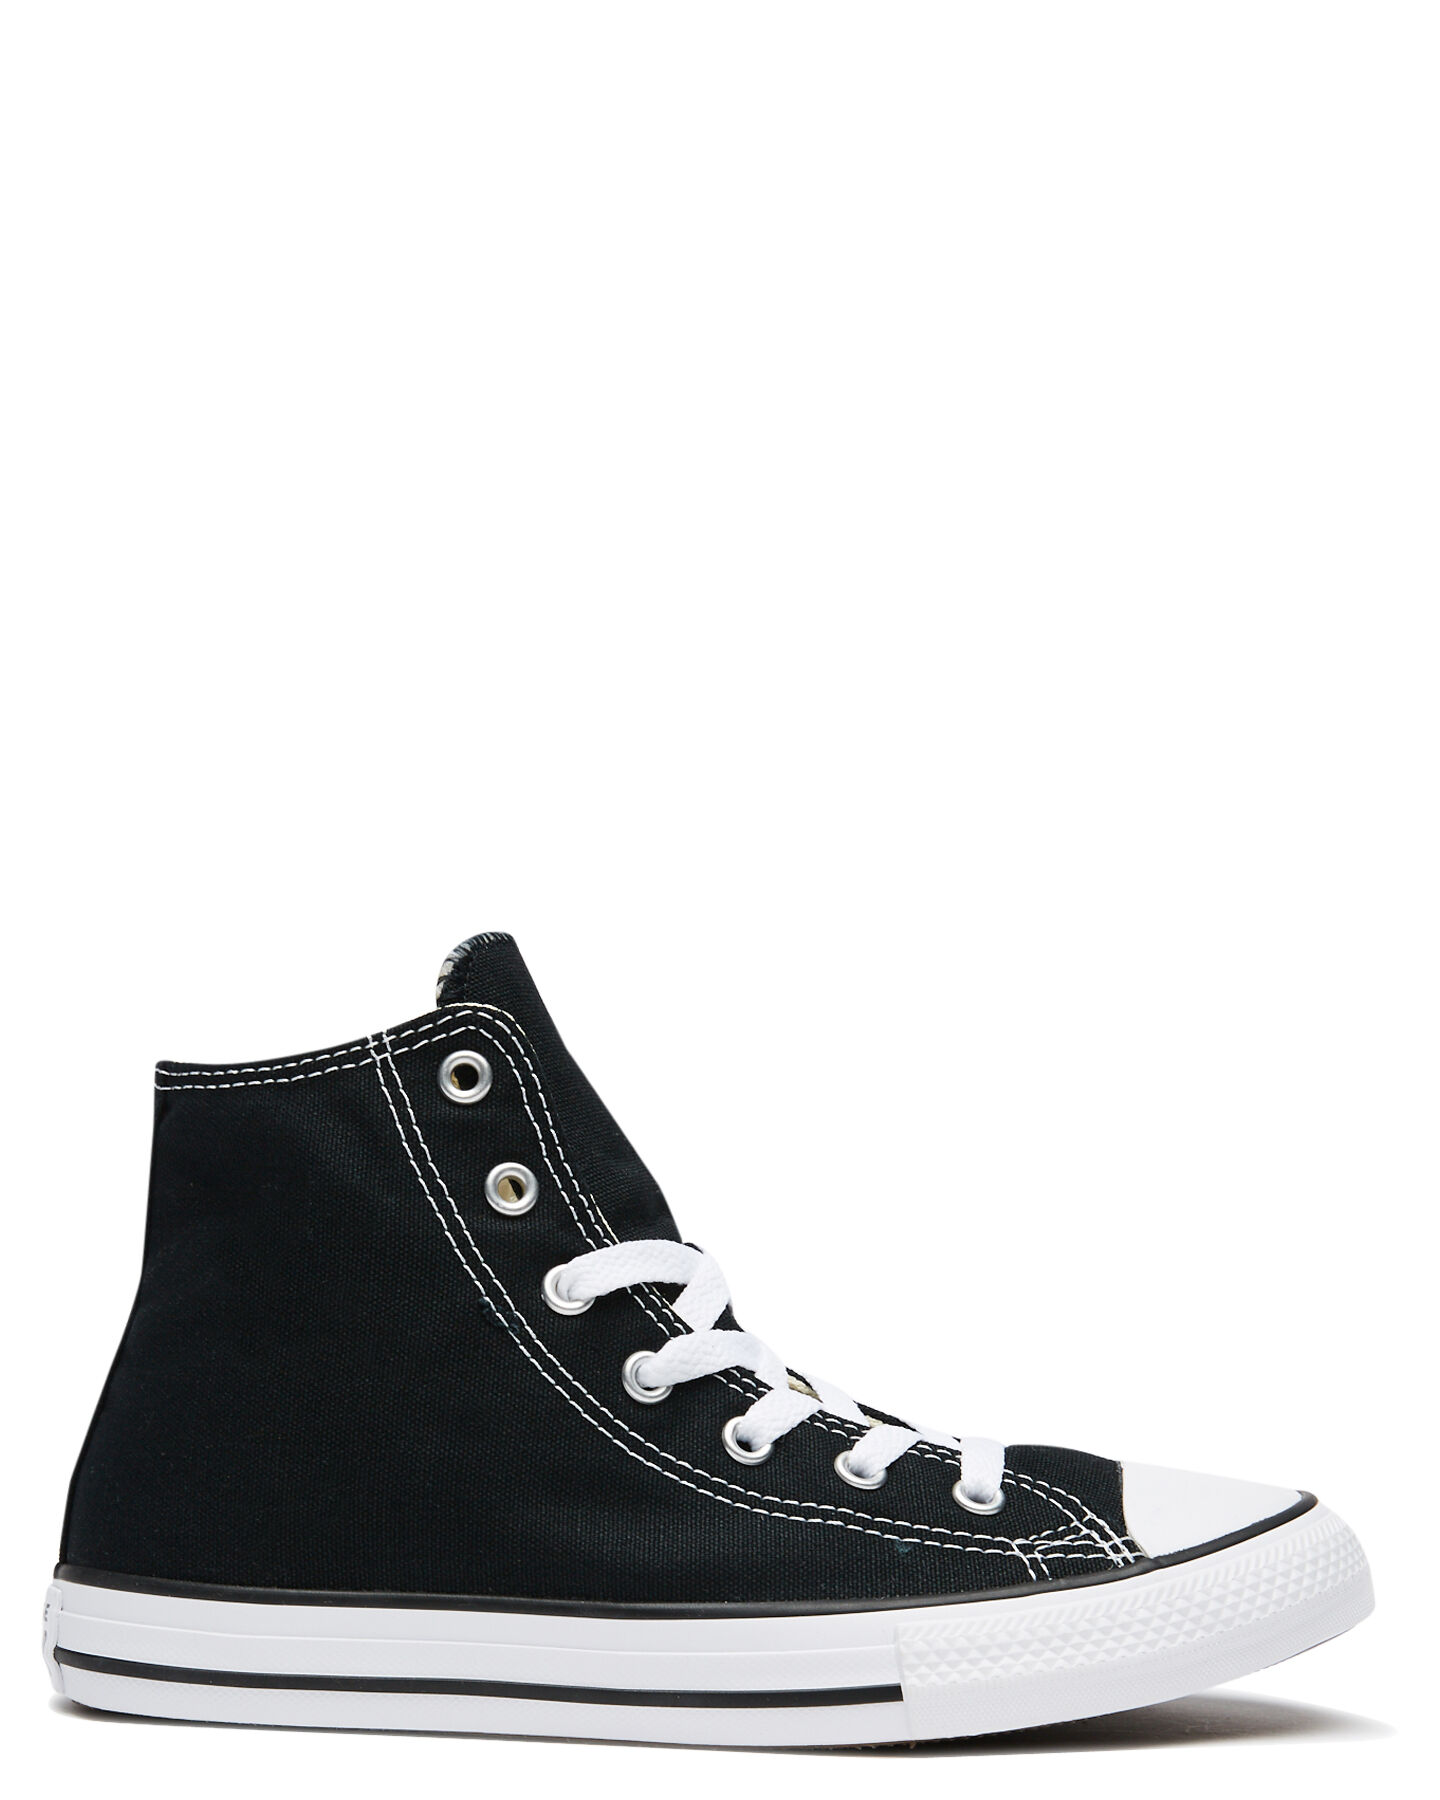 all star converse shoes online shopping